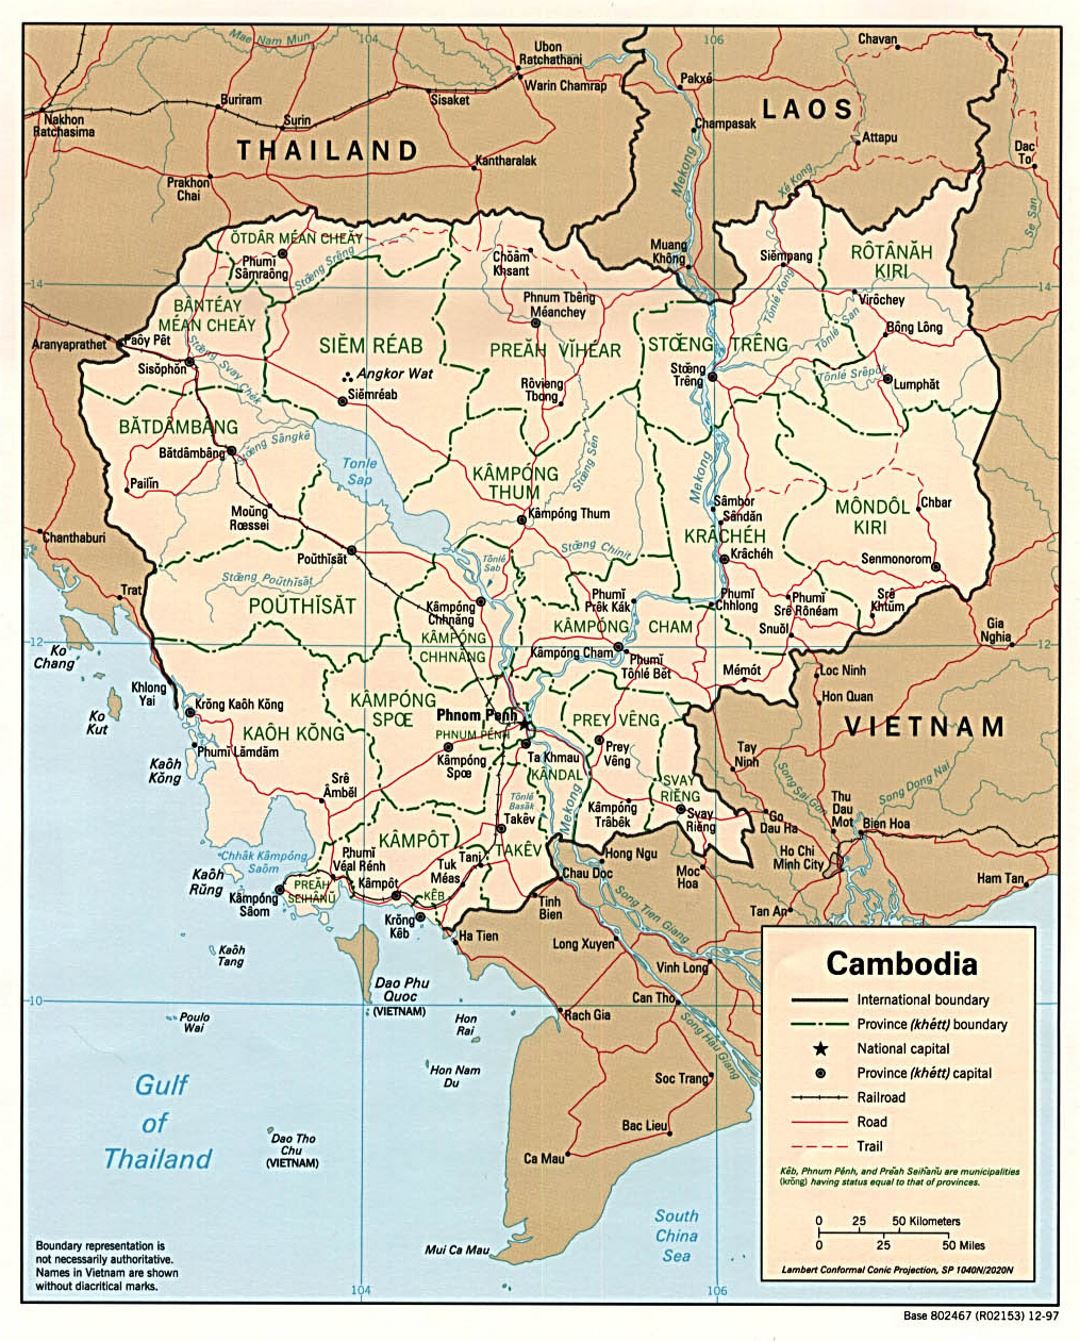 Detailed political and administrative map of Cambodia with roads, railroads and major cities - 1997